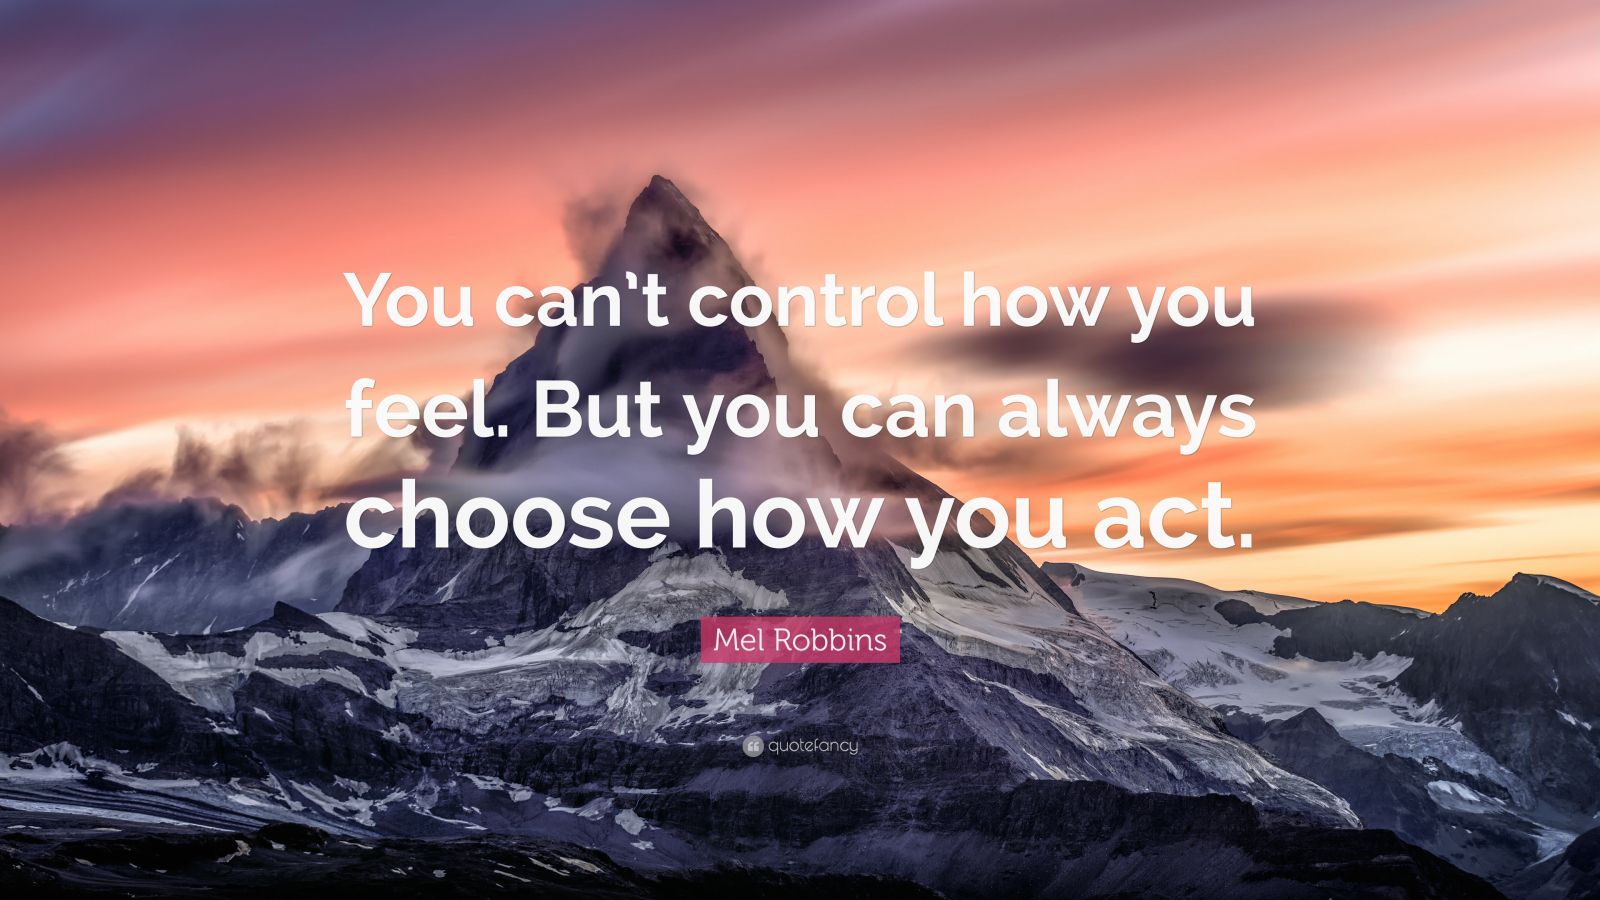 Mel Robbins Quote: “You can’t control how you feel. But you can always